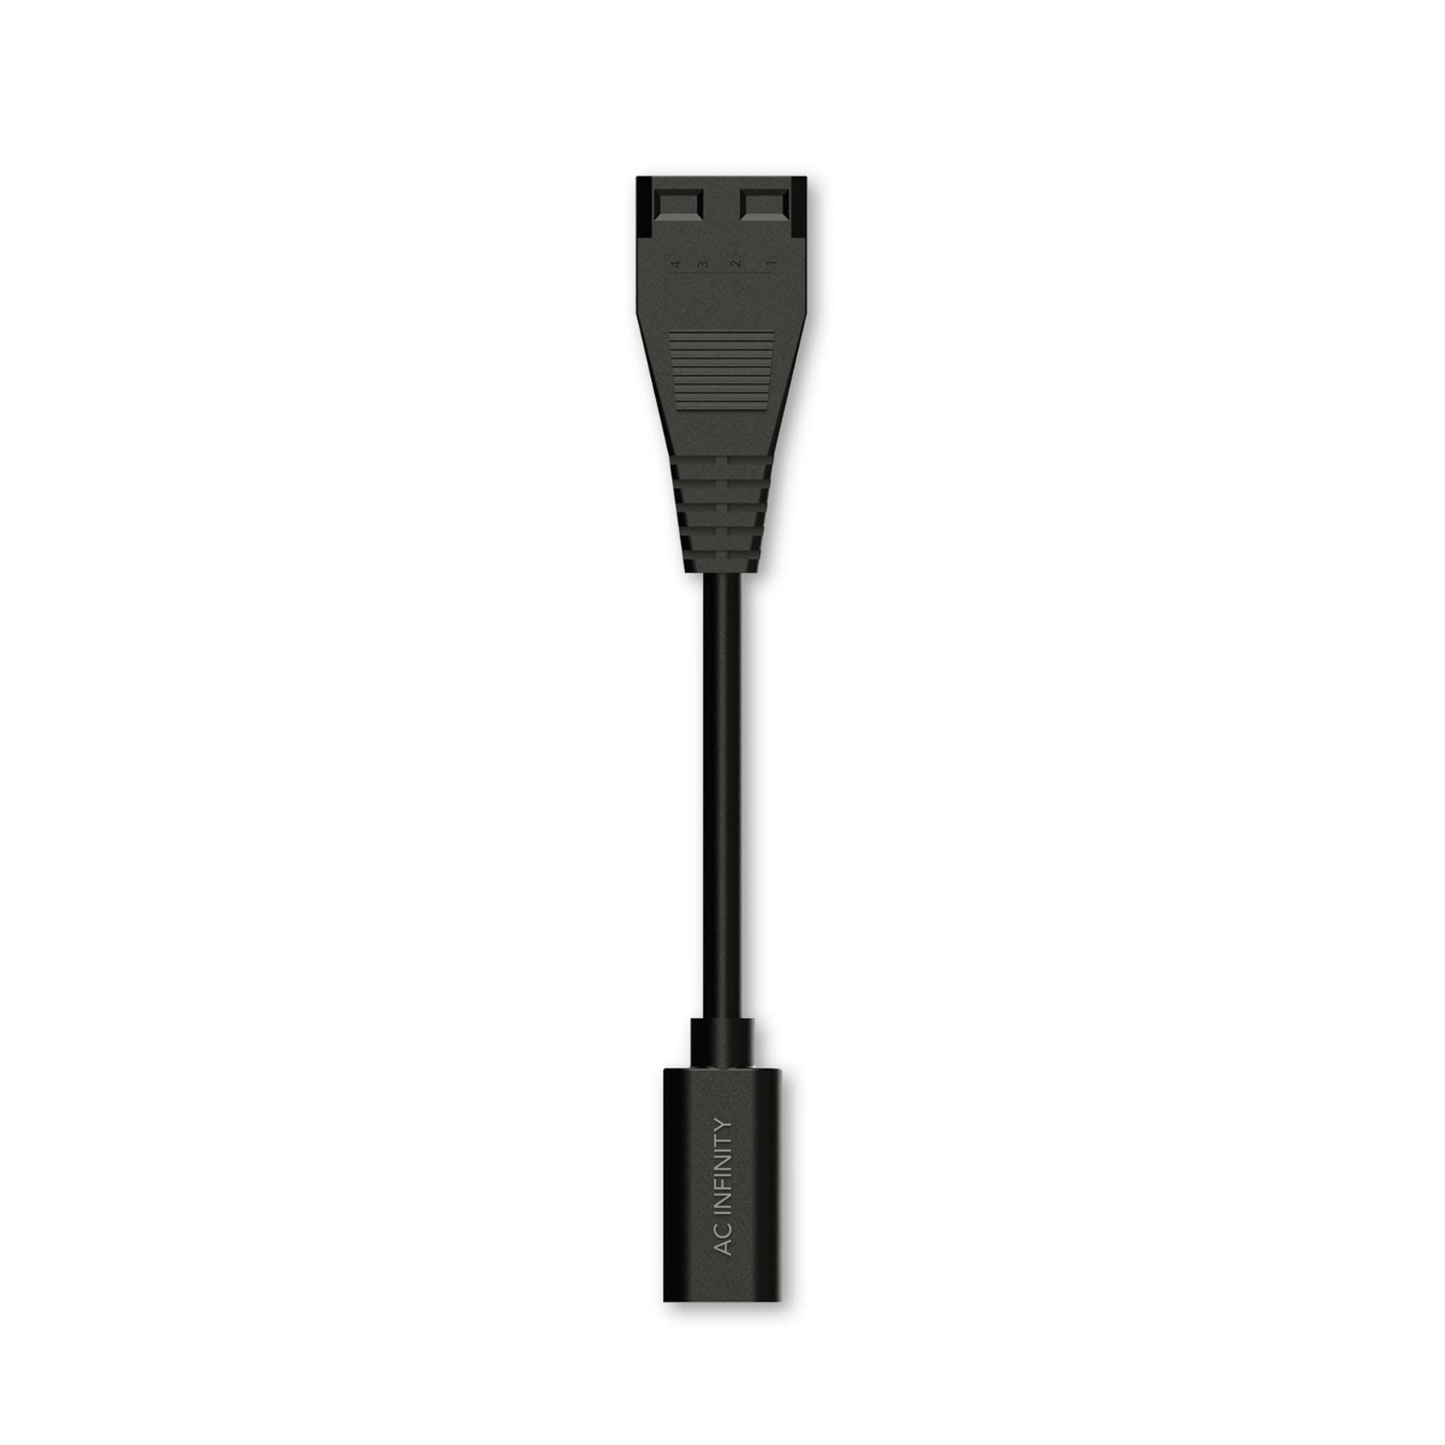 AC Infinity UIS to Molex Port Adapter Dongle, Conversion Cable Cord | AC-ADQ3 | Grow Tents Depot | Climate Control | 819137022218